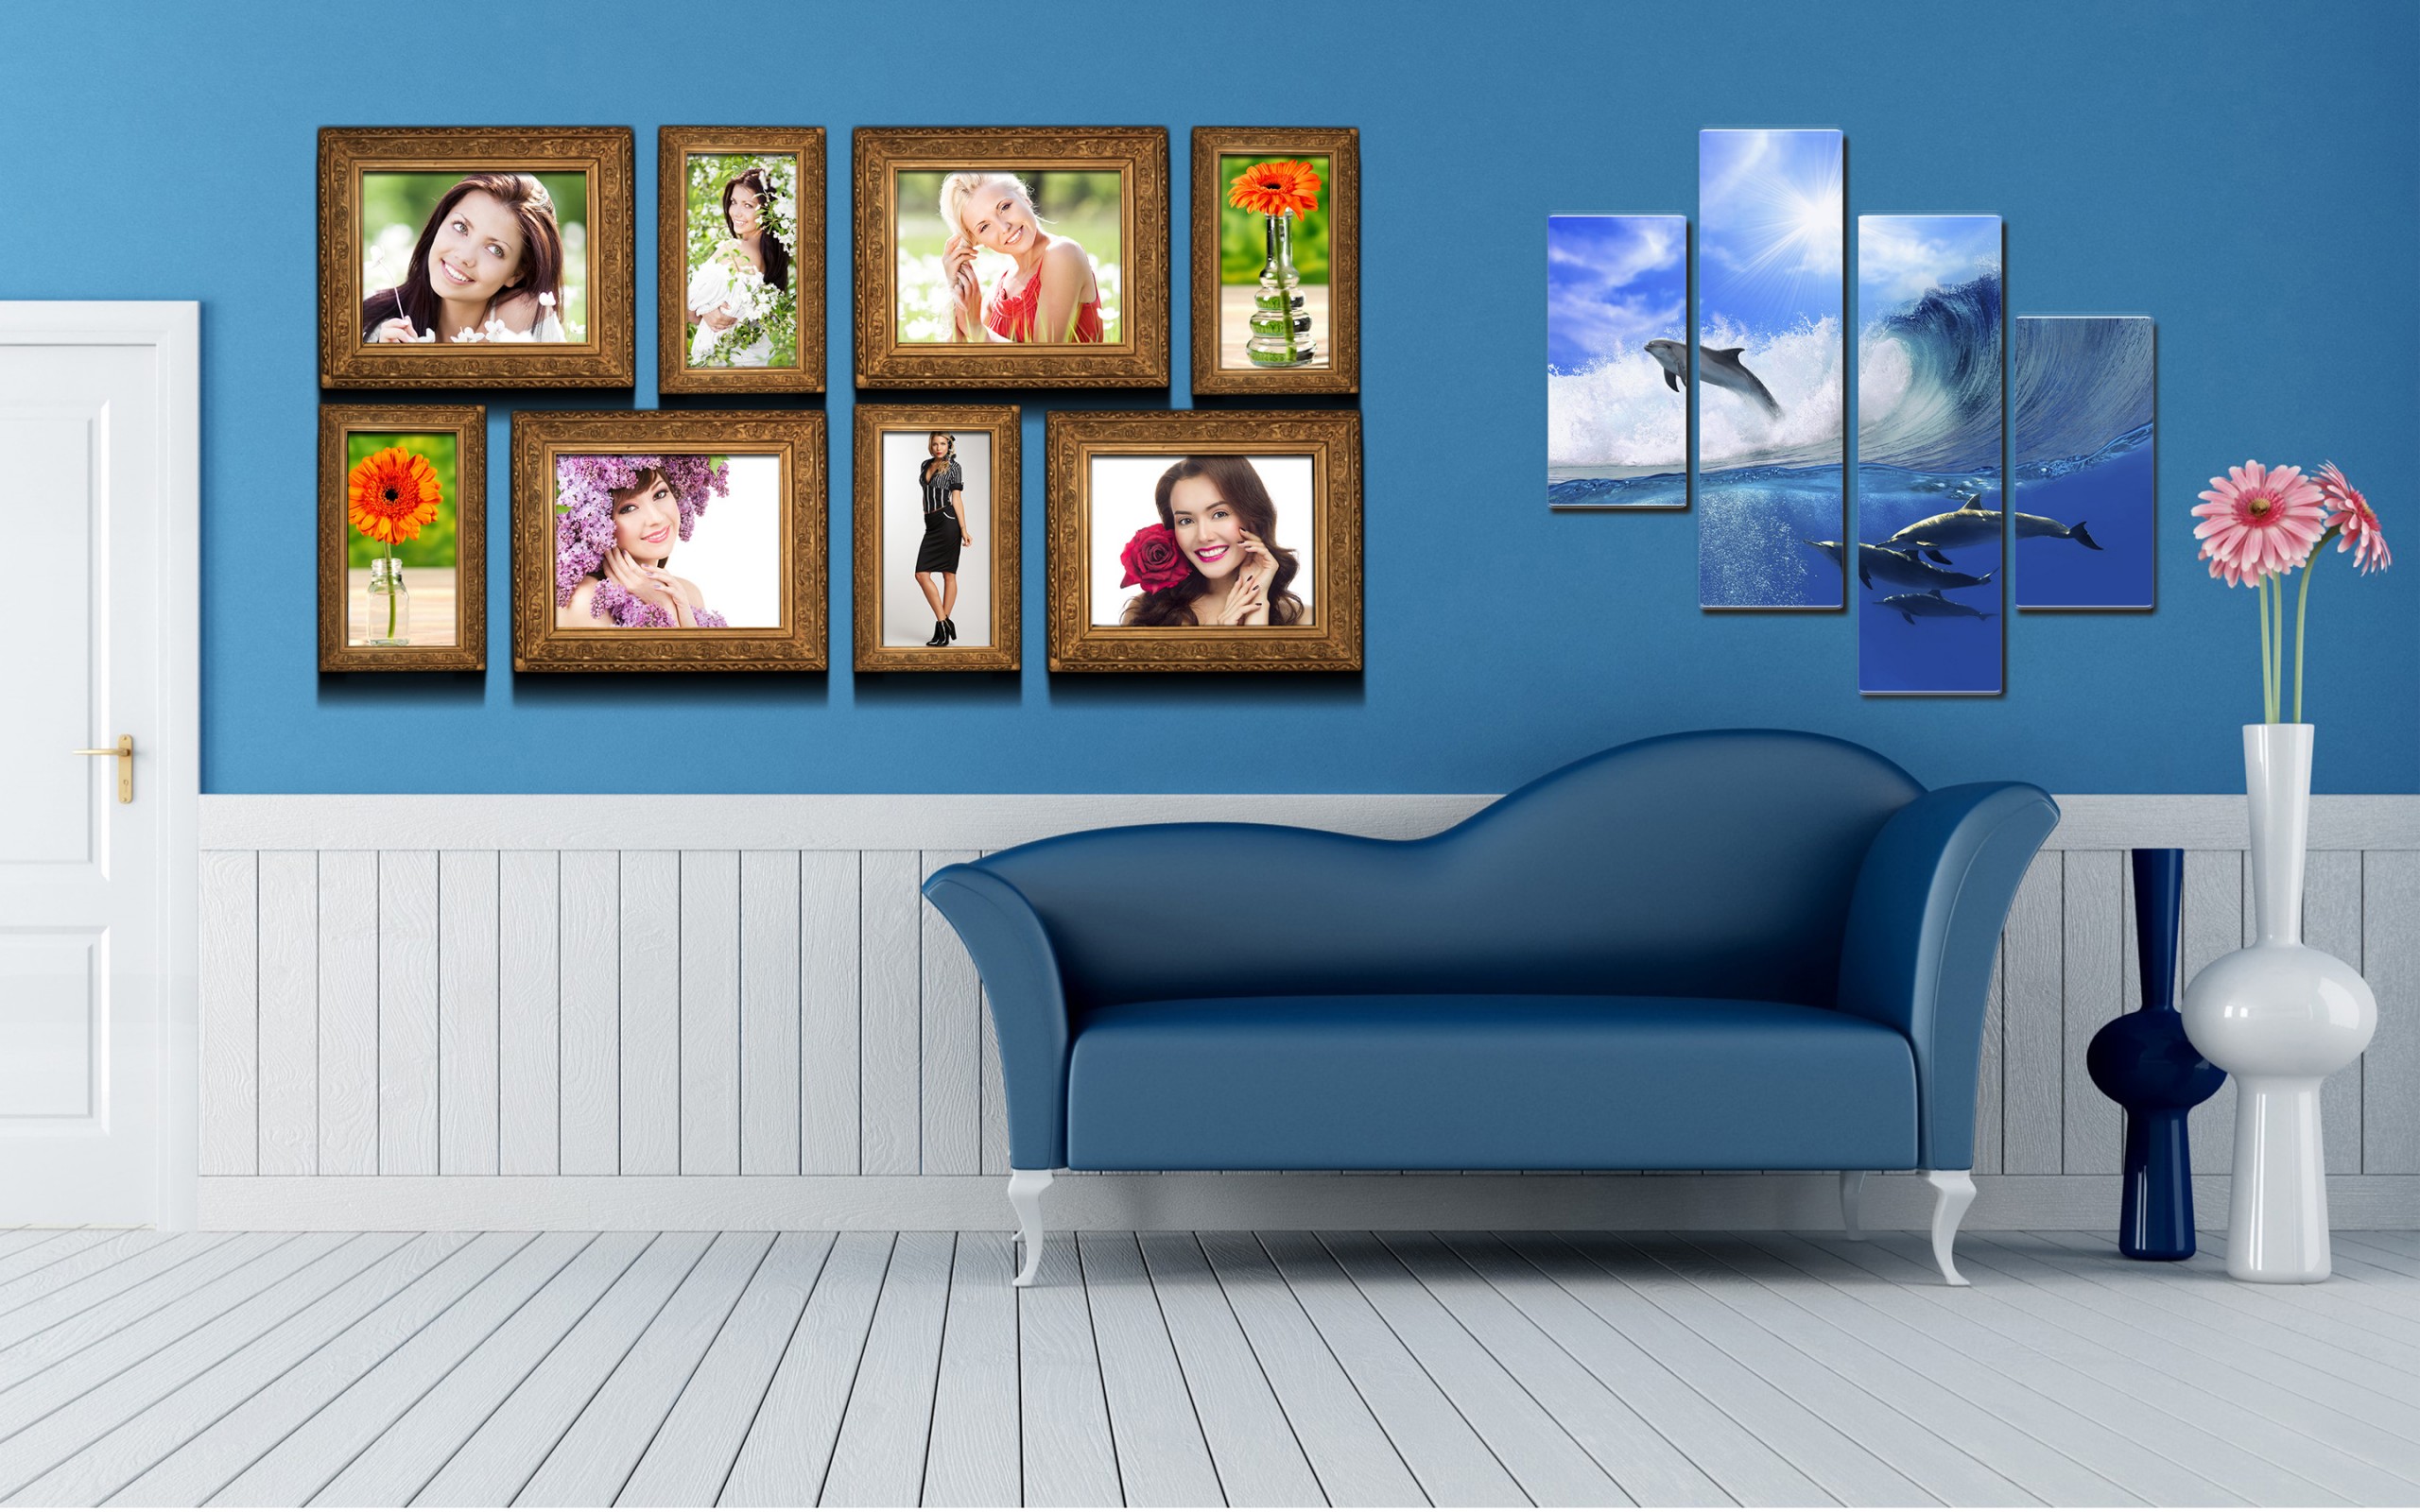 interior, Sofa, Flowers, Vases, Pictures, Polyptych, Dolphins, Faces